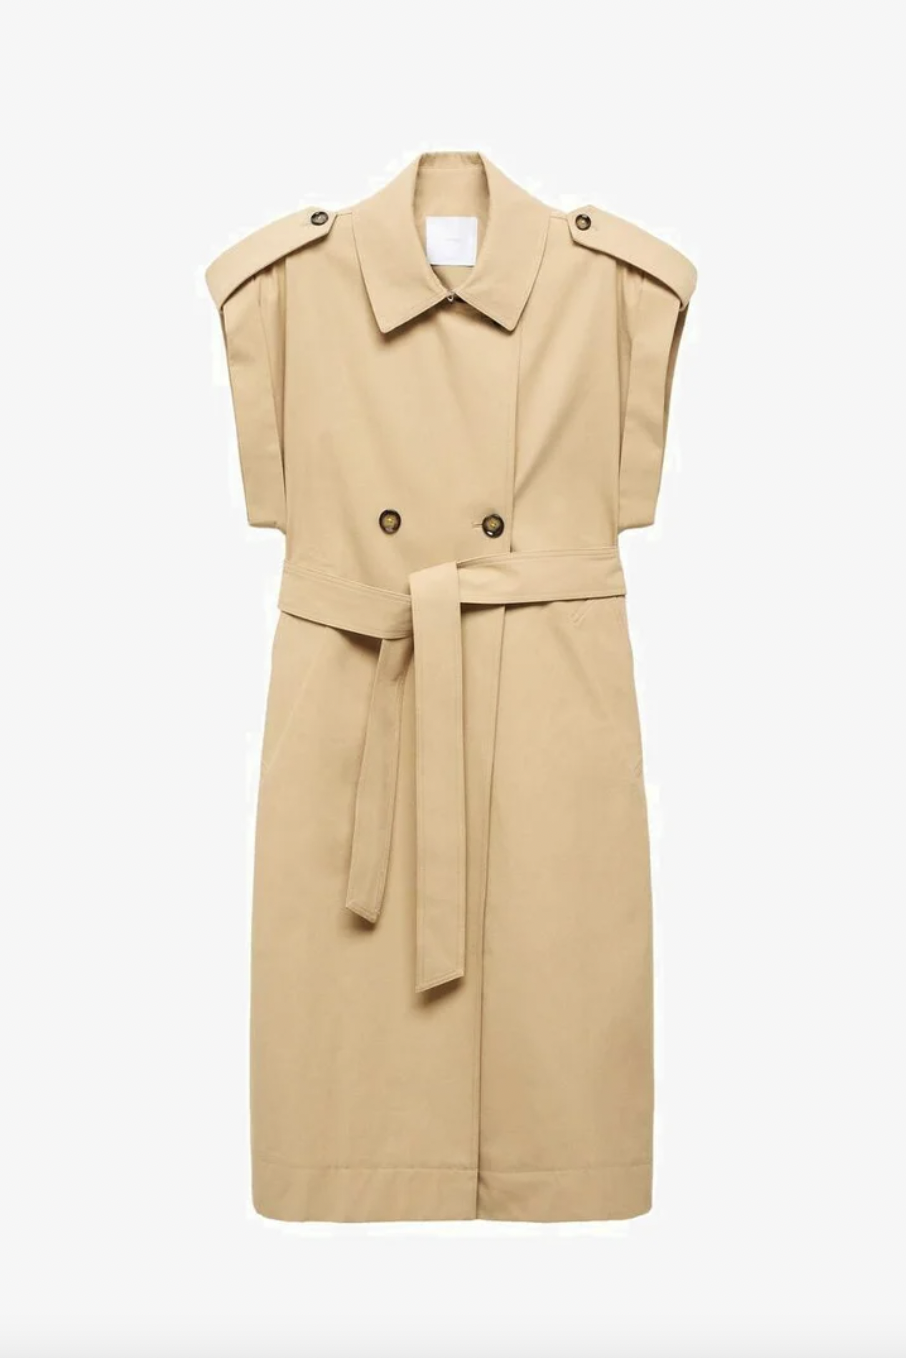 Best trench coats for women 2023: From Marks & Spencer to Burberry